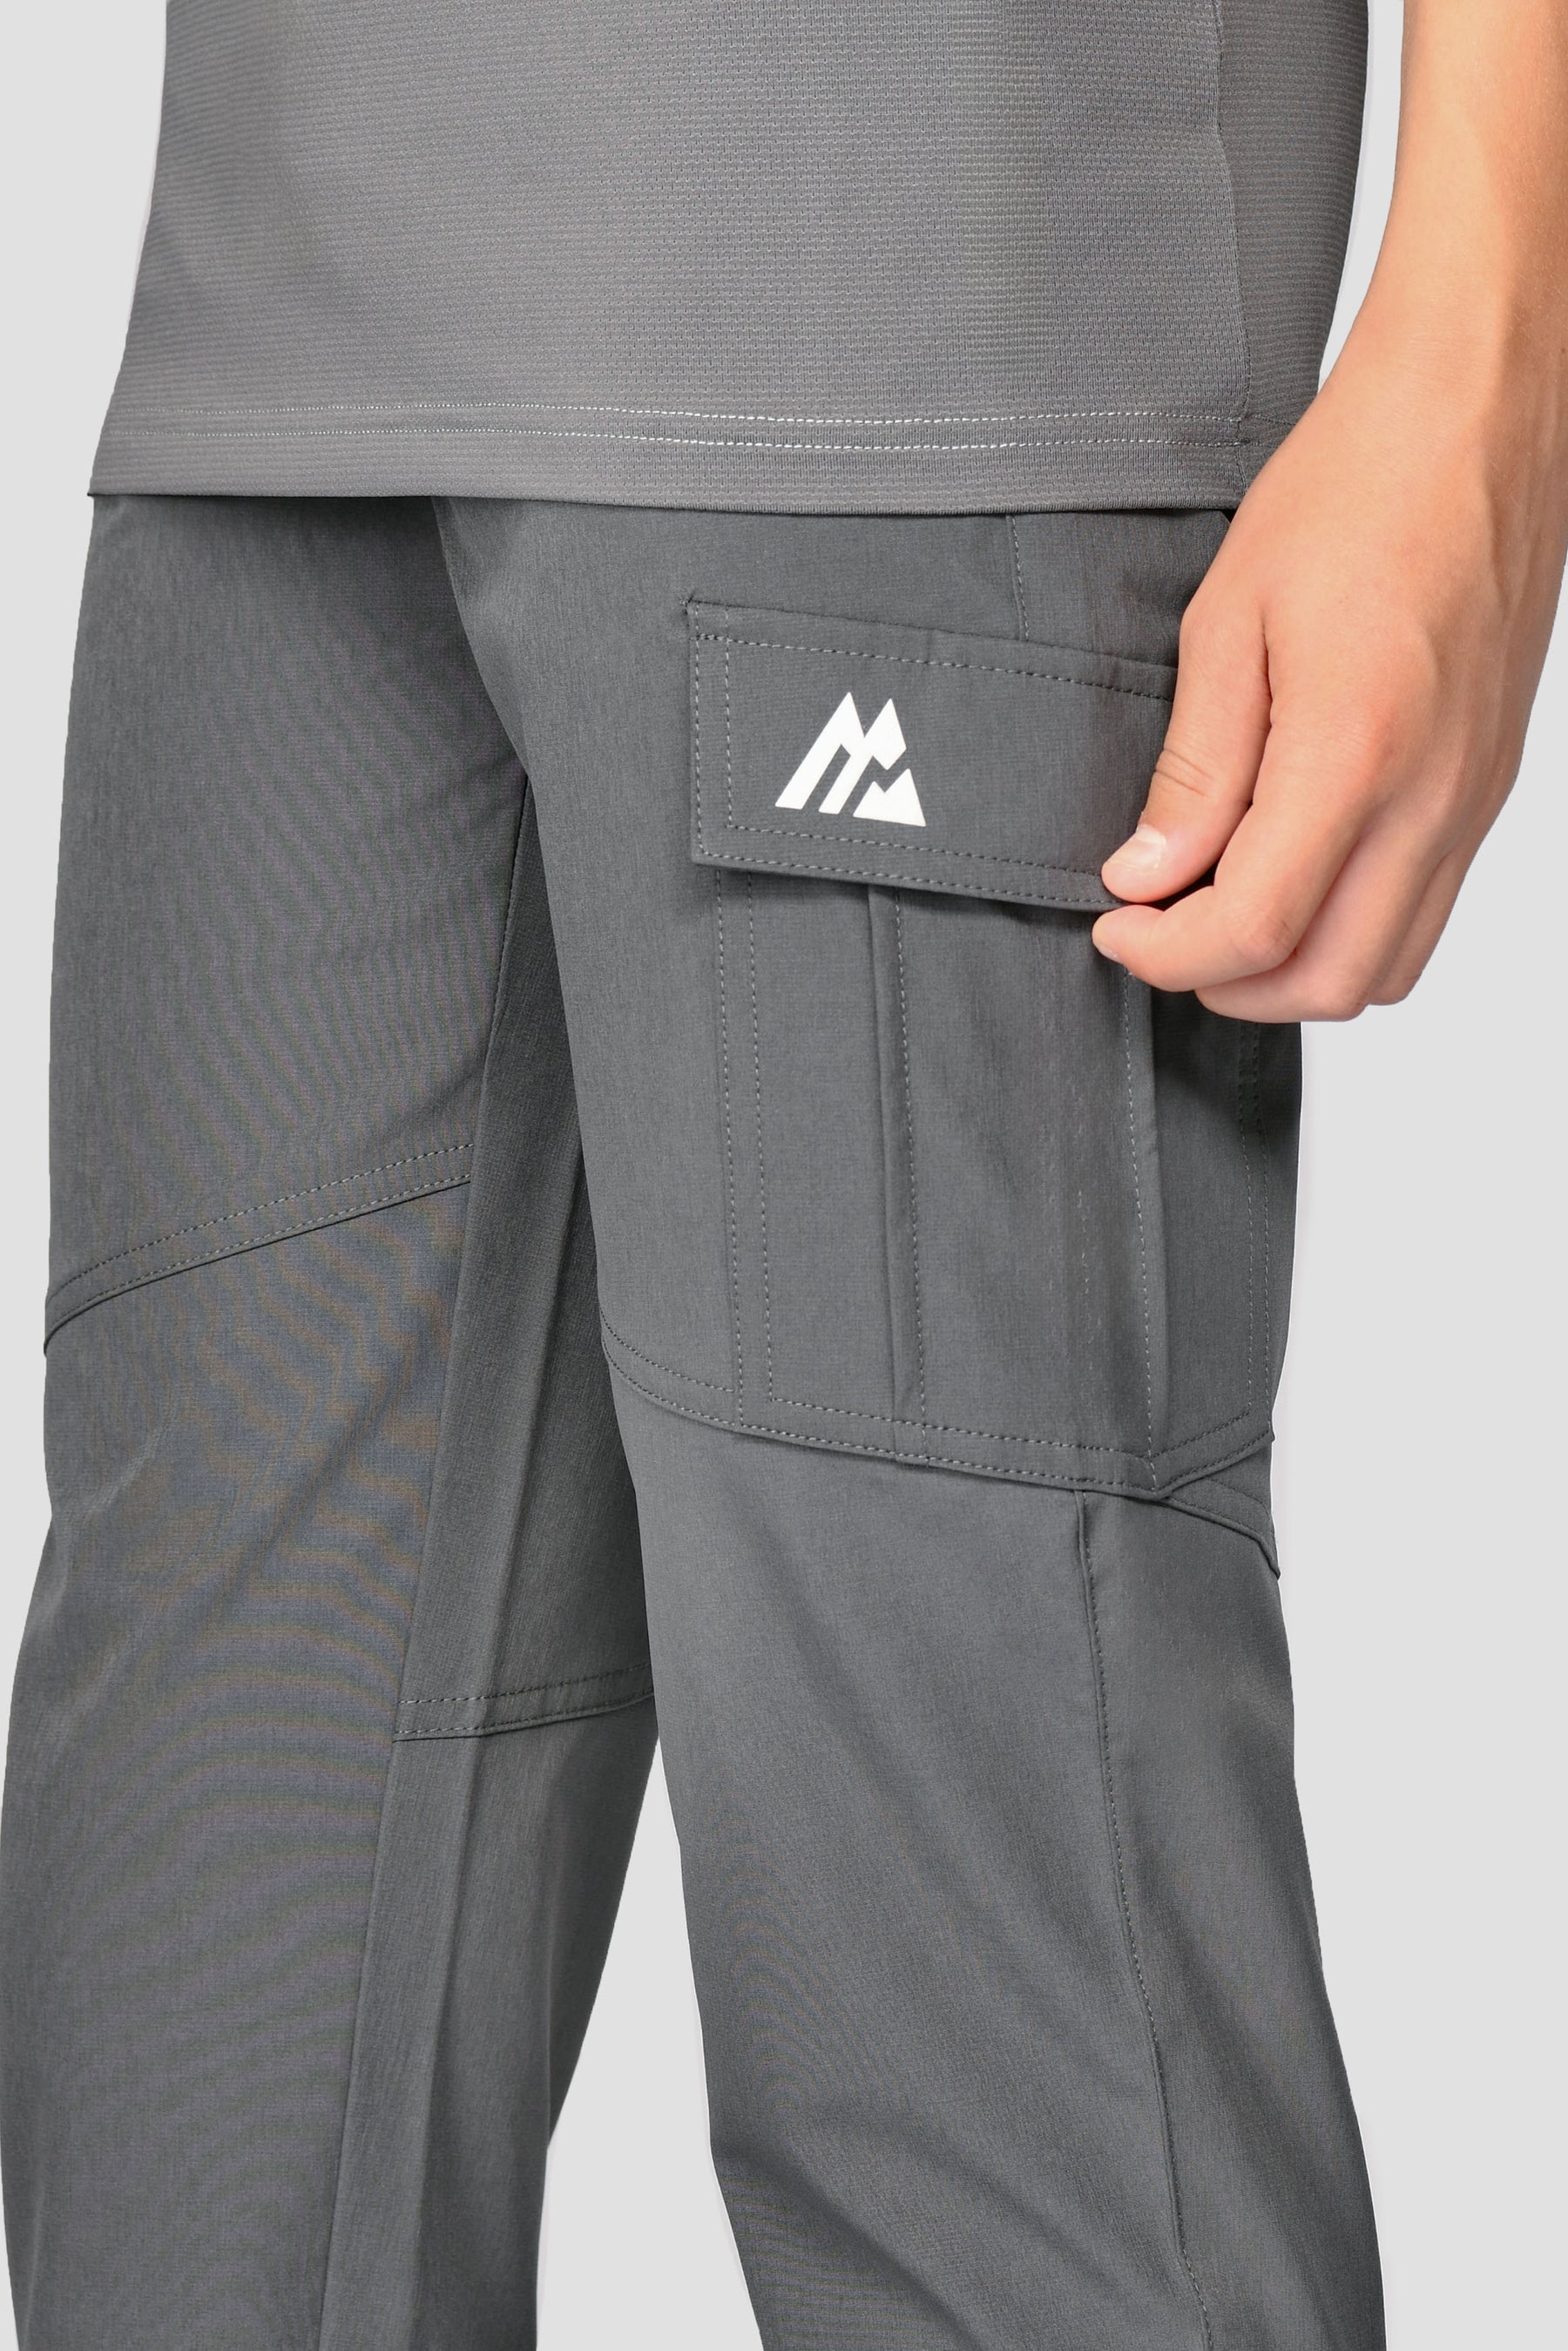 Junior Expedition Outdoor Pant - Jet Grey